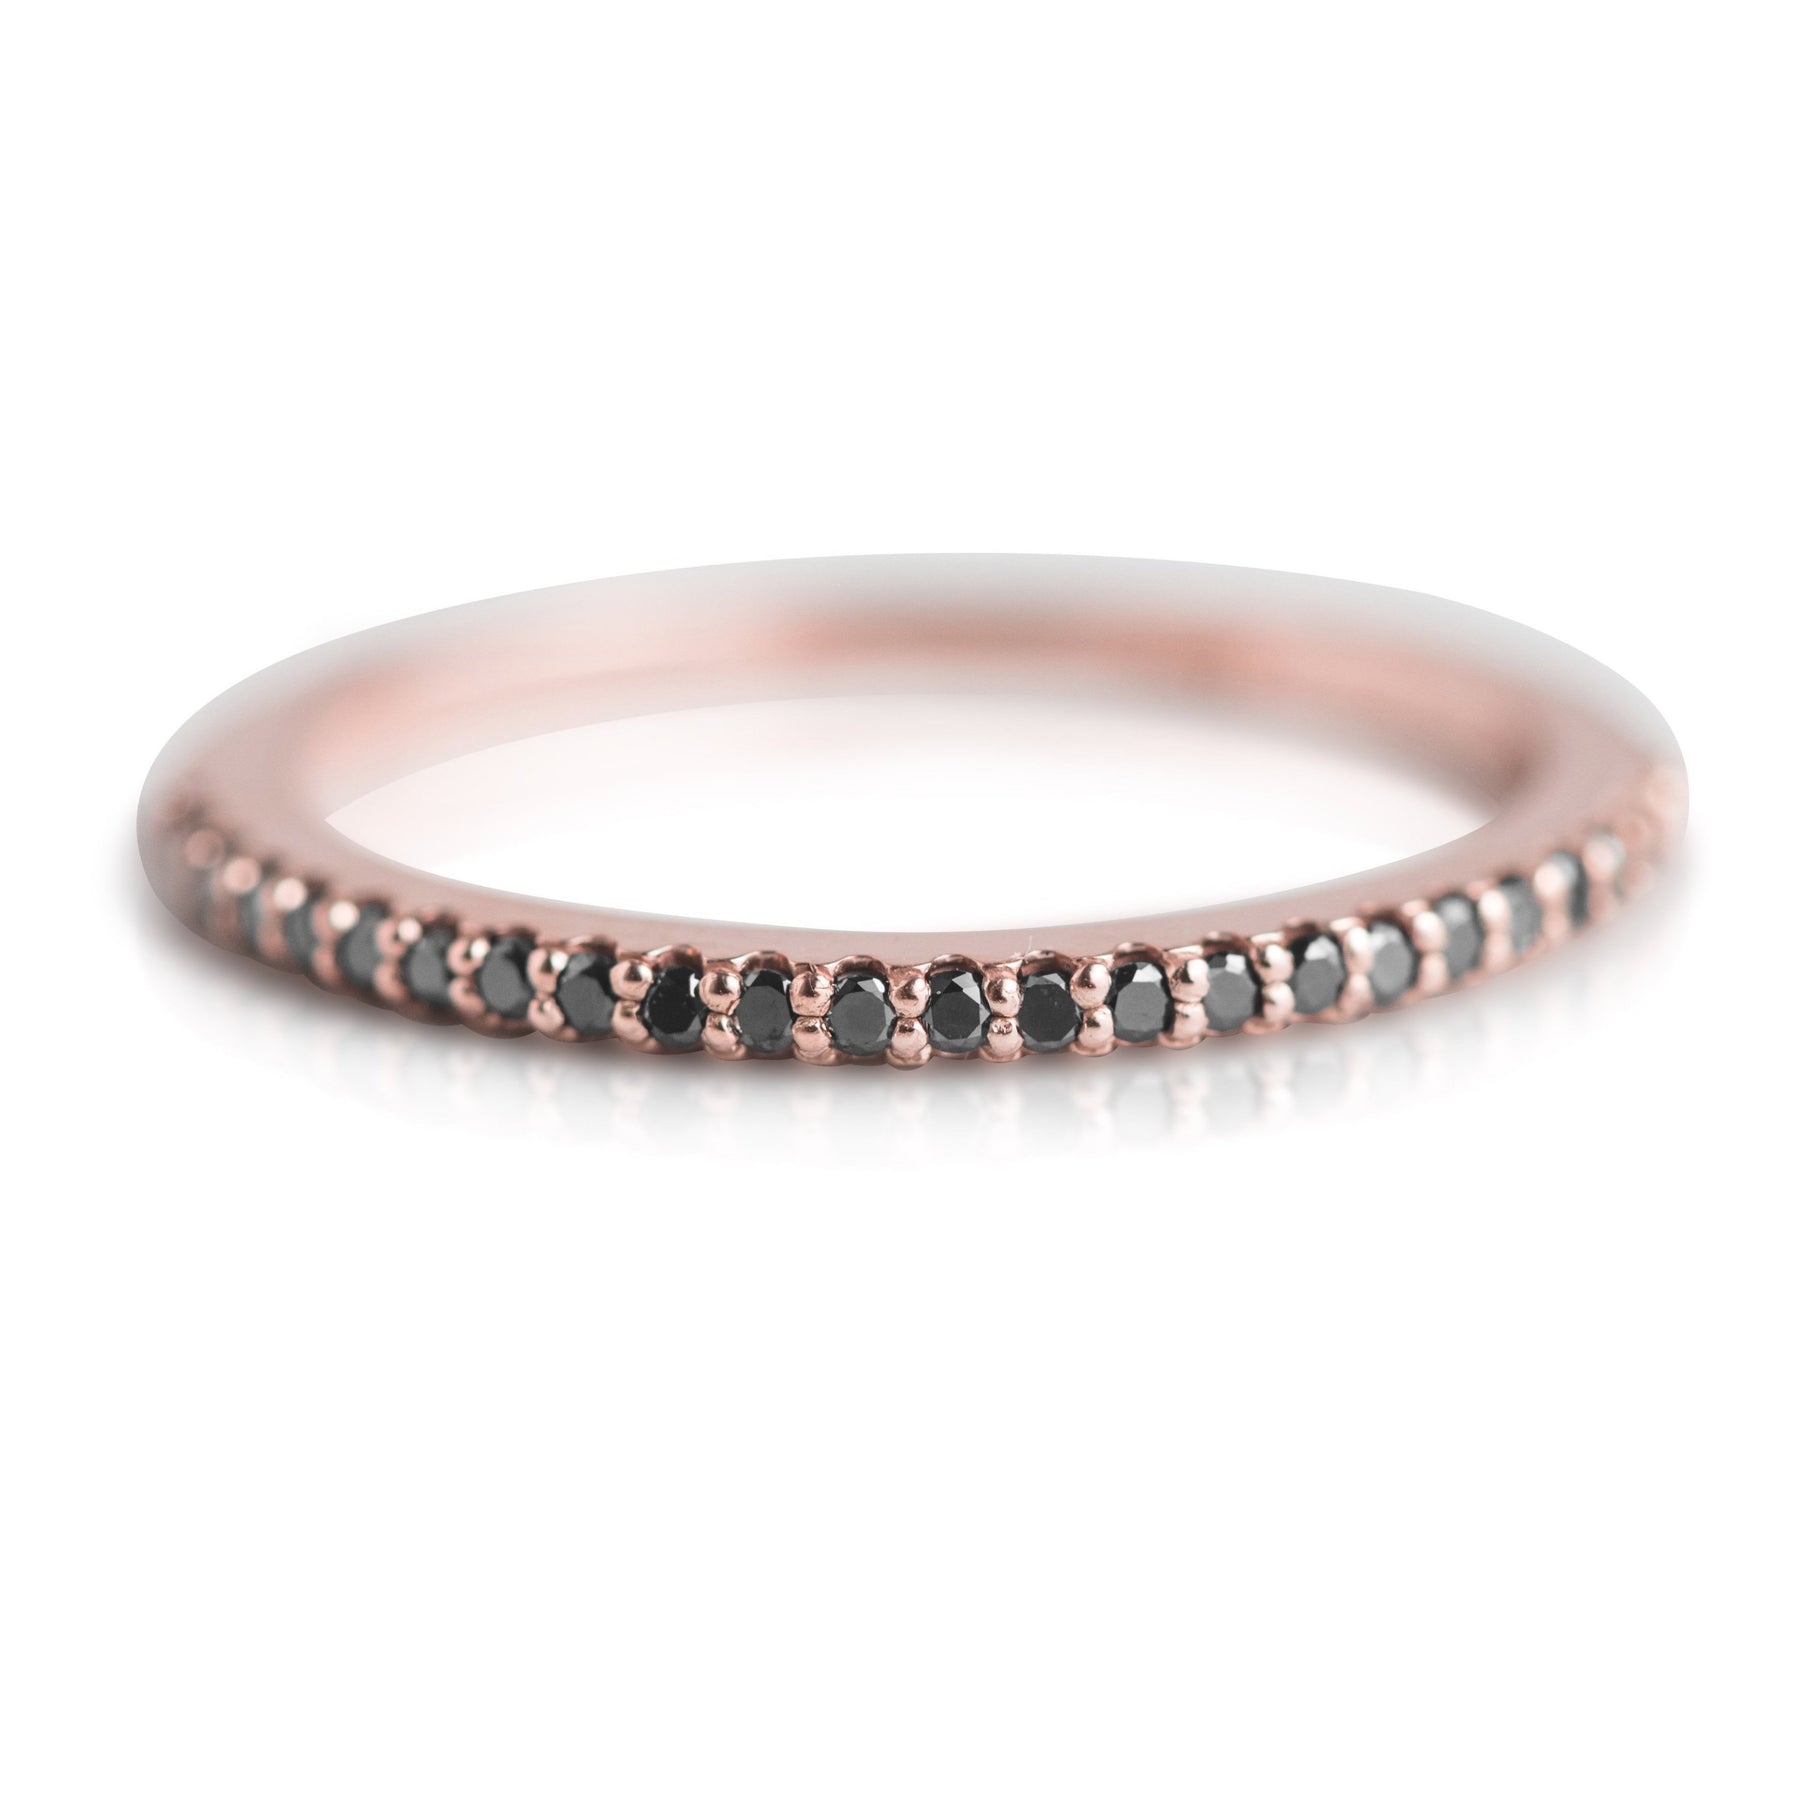 BLACK DIAMOND AND ROSE GOLD STACK RING